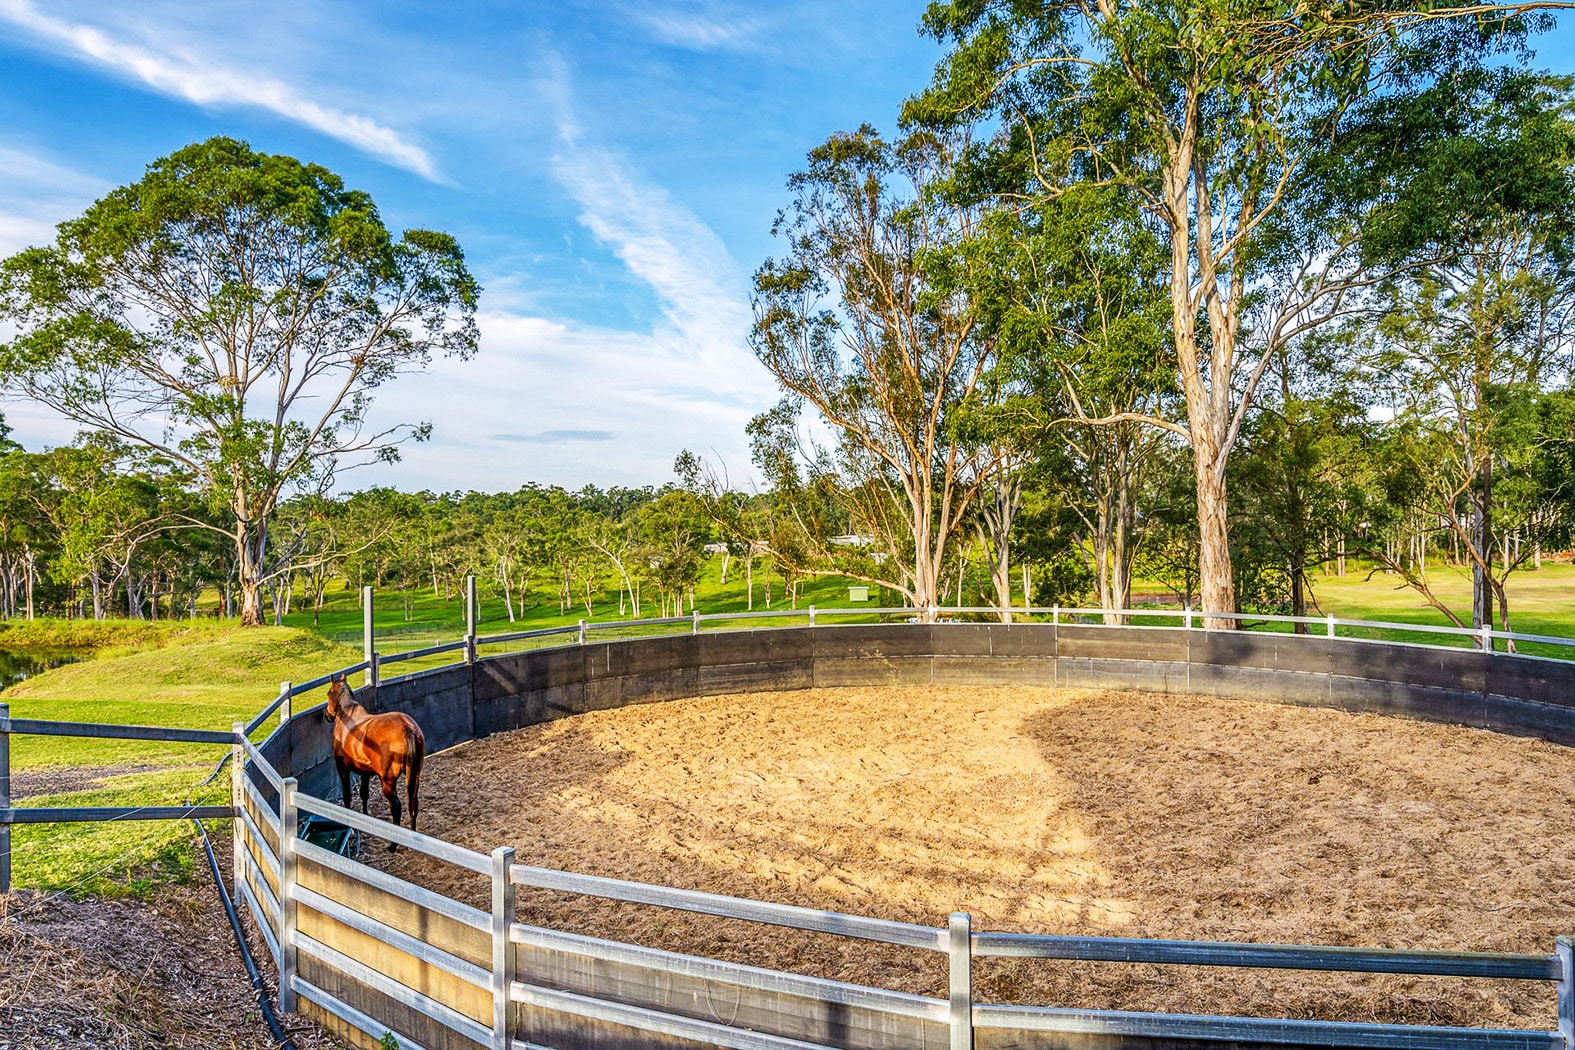 Located amid beautiful scenery, the large round yard has a sand base and galvanised rails.